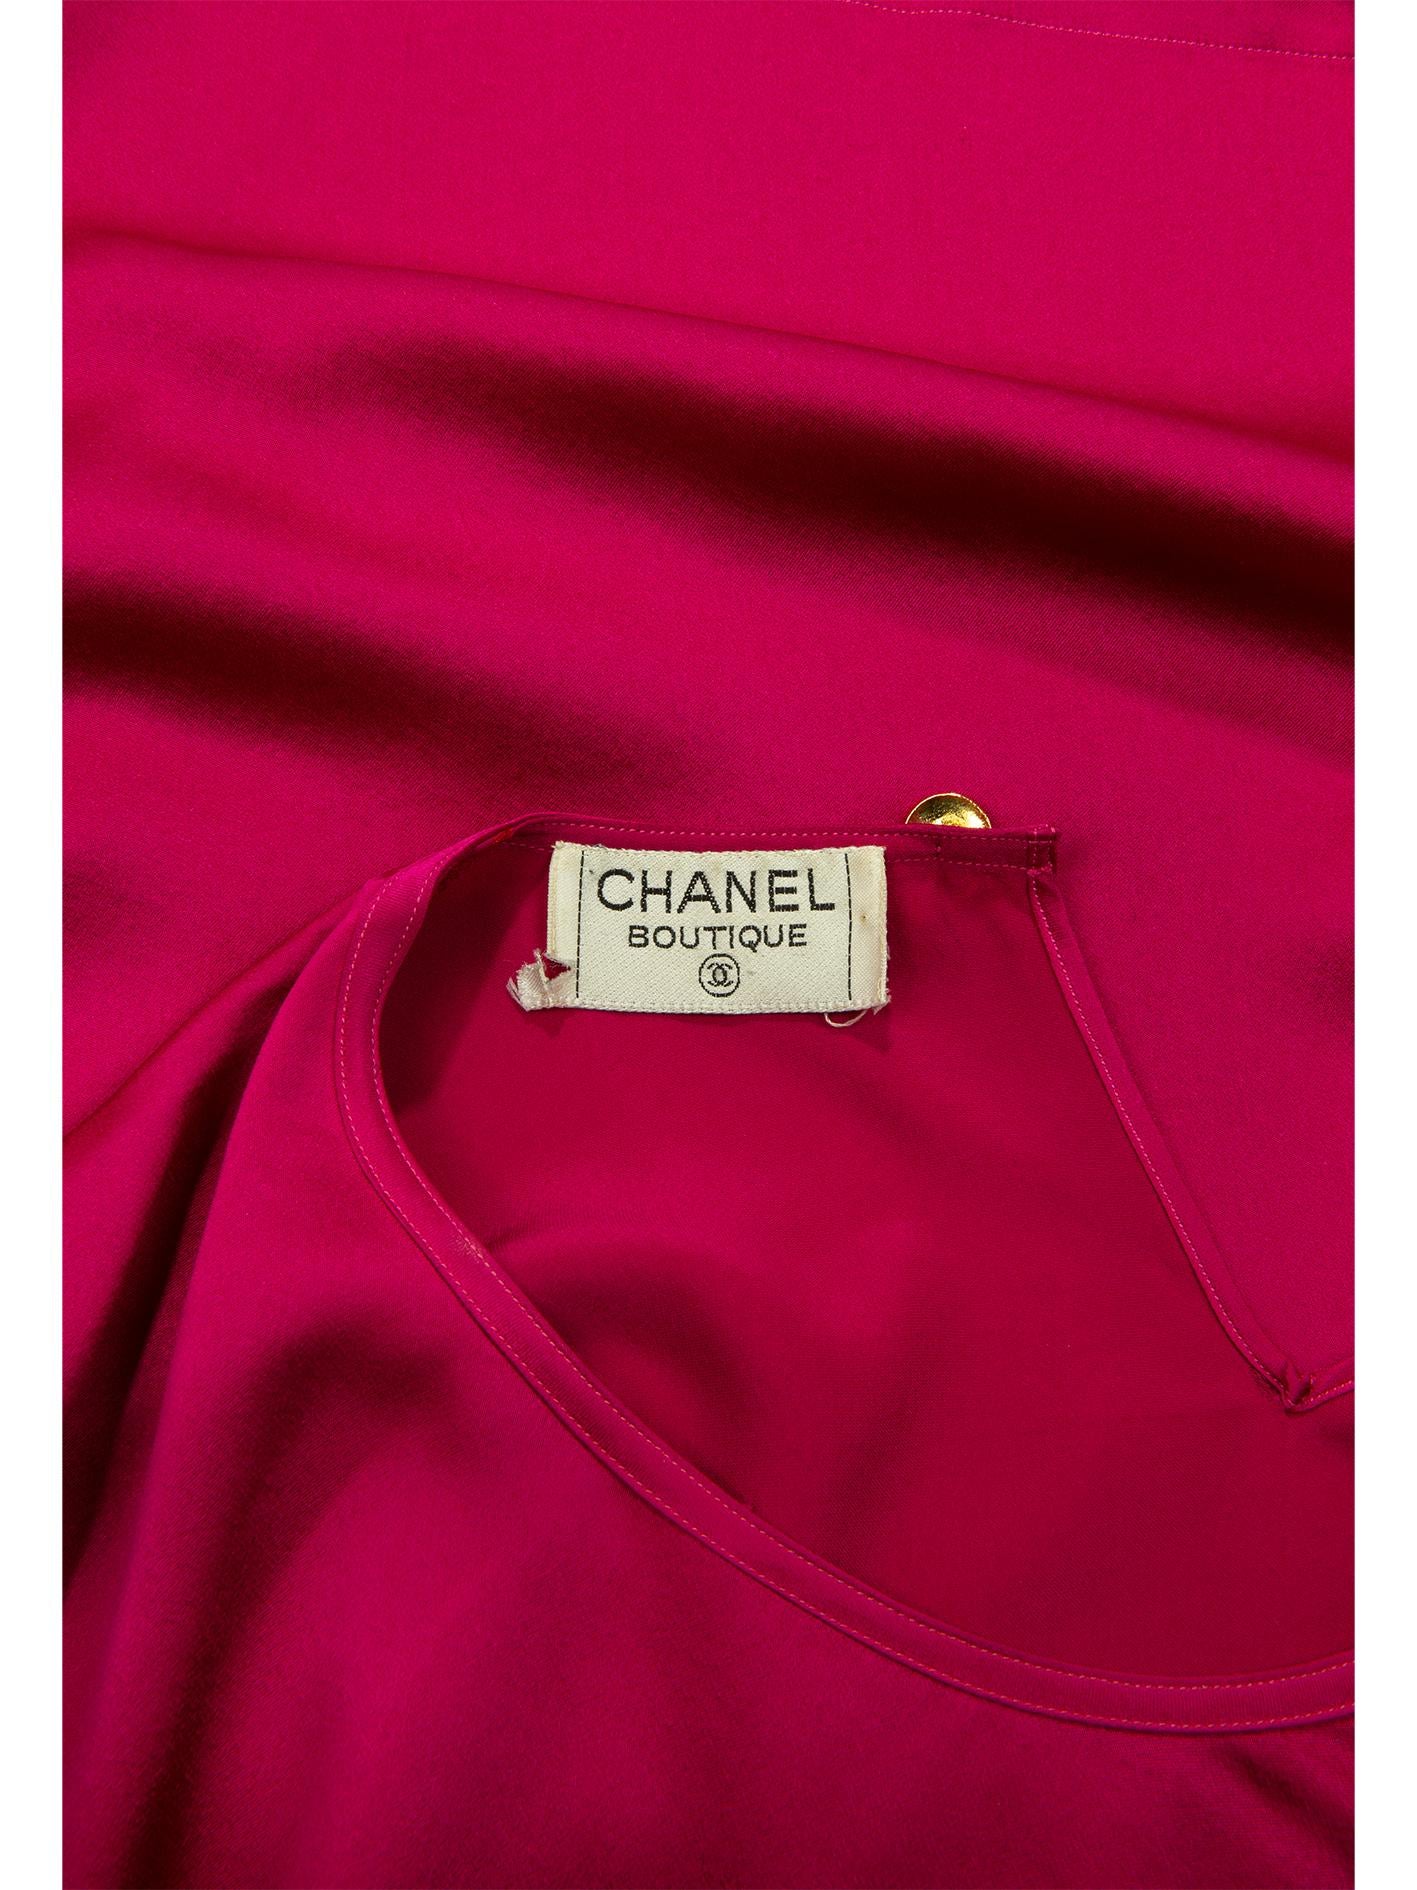 Women's Chanel Hot Pink Satin Top For Sale